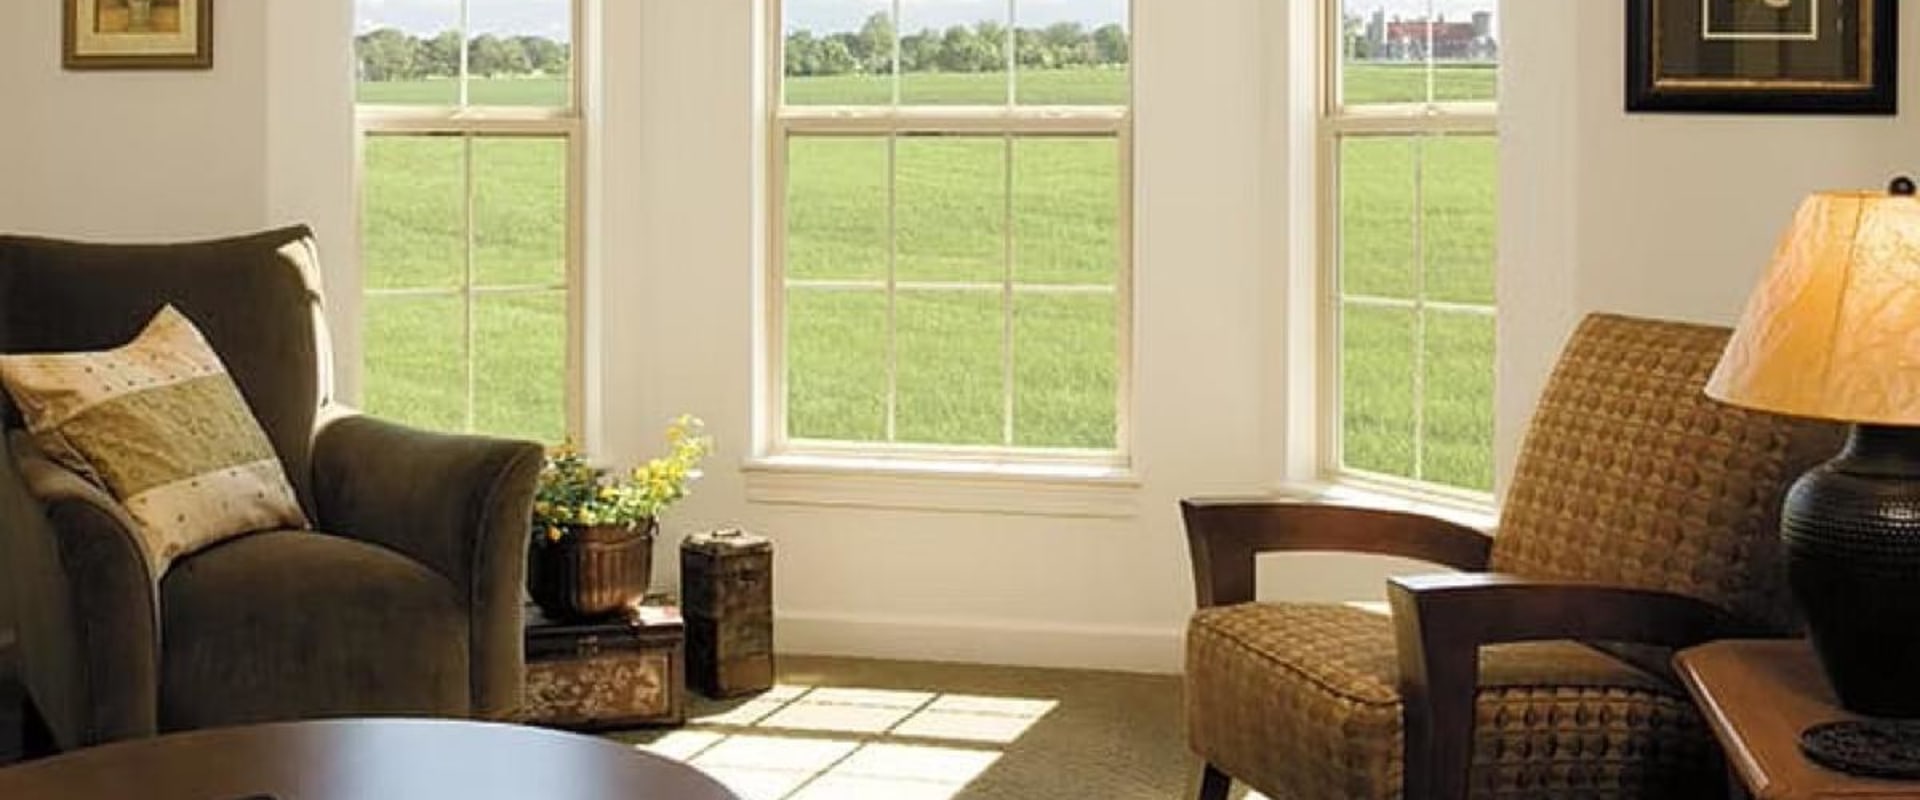 The Importance Of Window Replacement In A Dallas Home Renovation Project